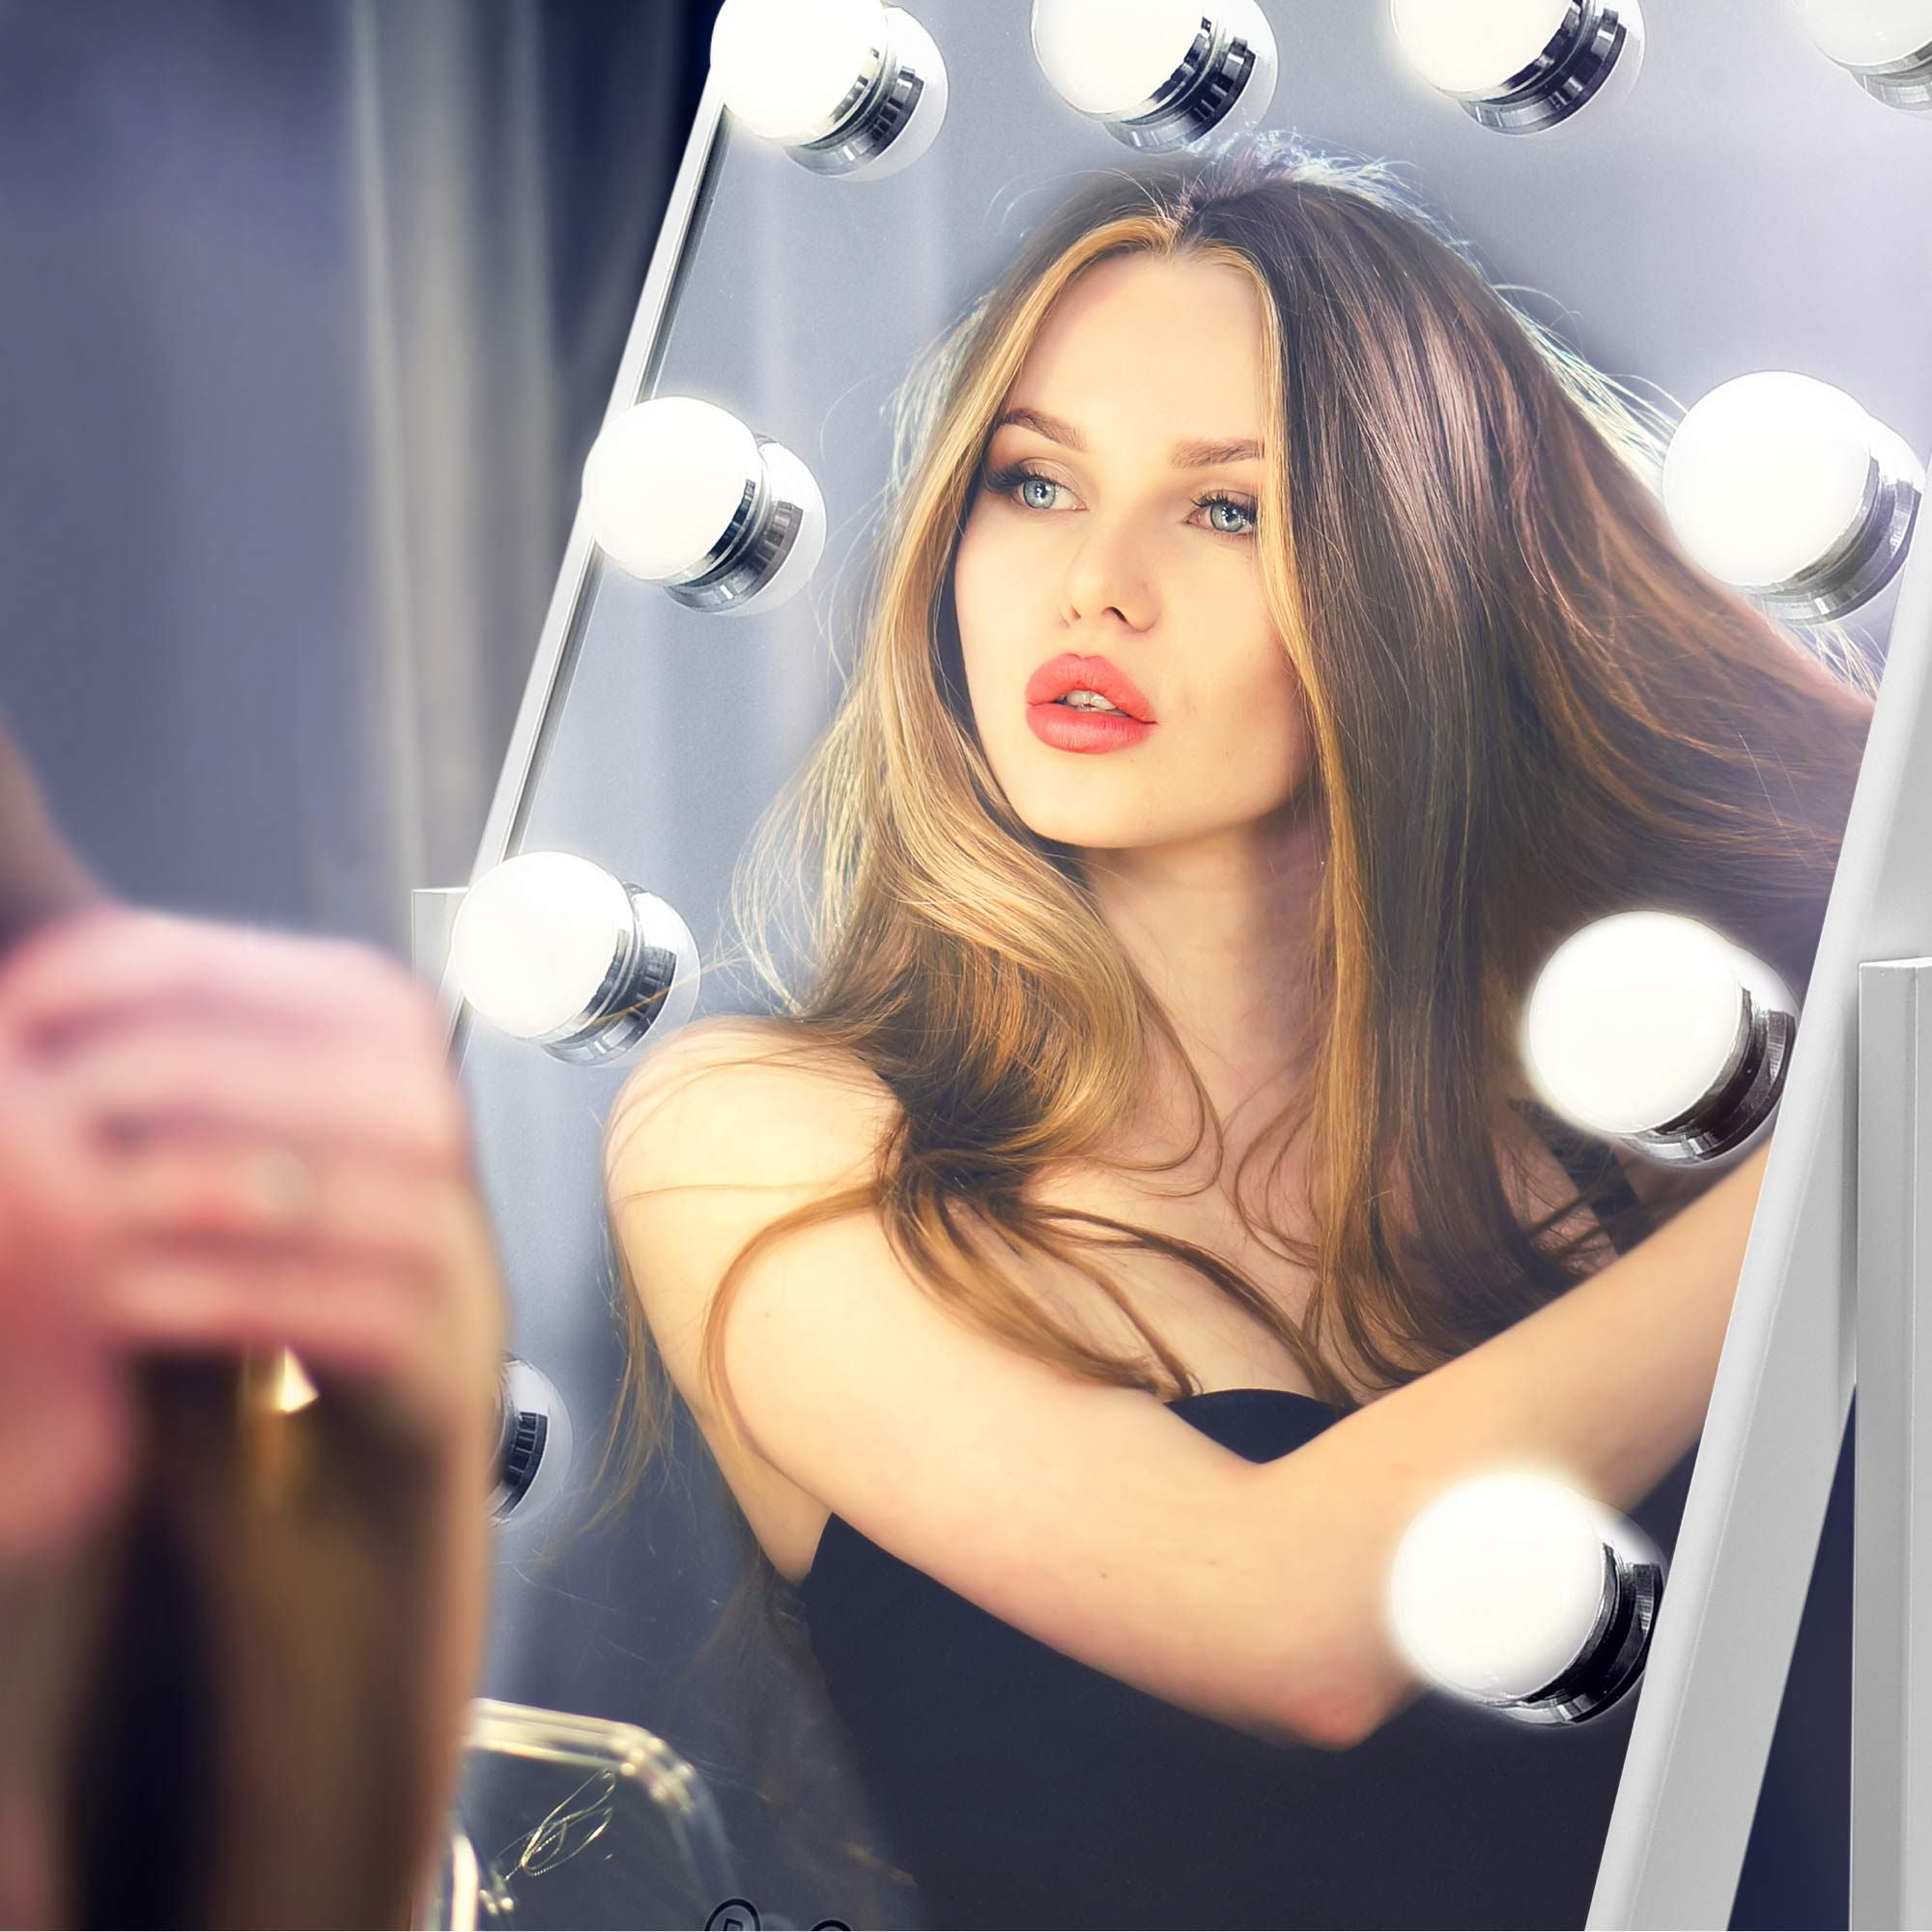 hollywood glamour mirror being used by lady doing her hair in dressing room with LED lights illuminated